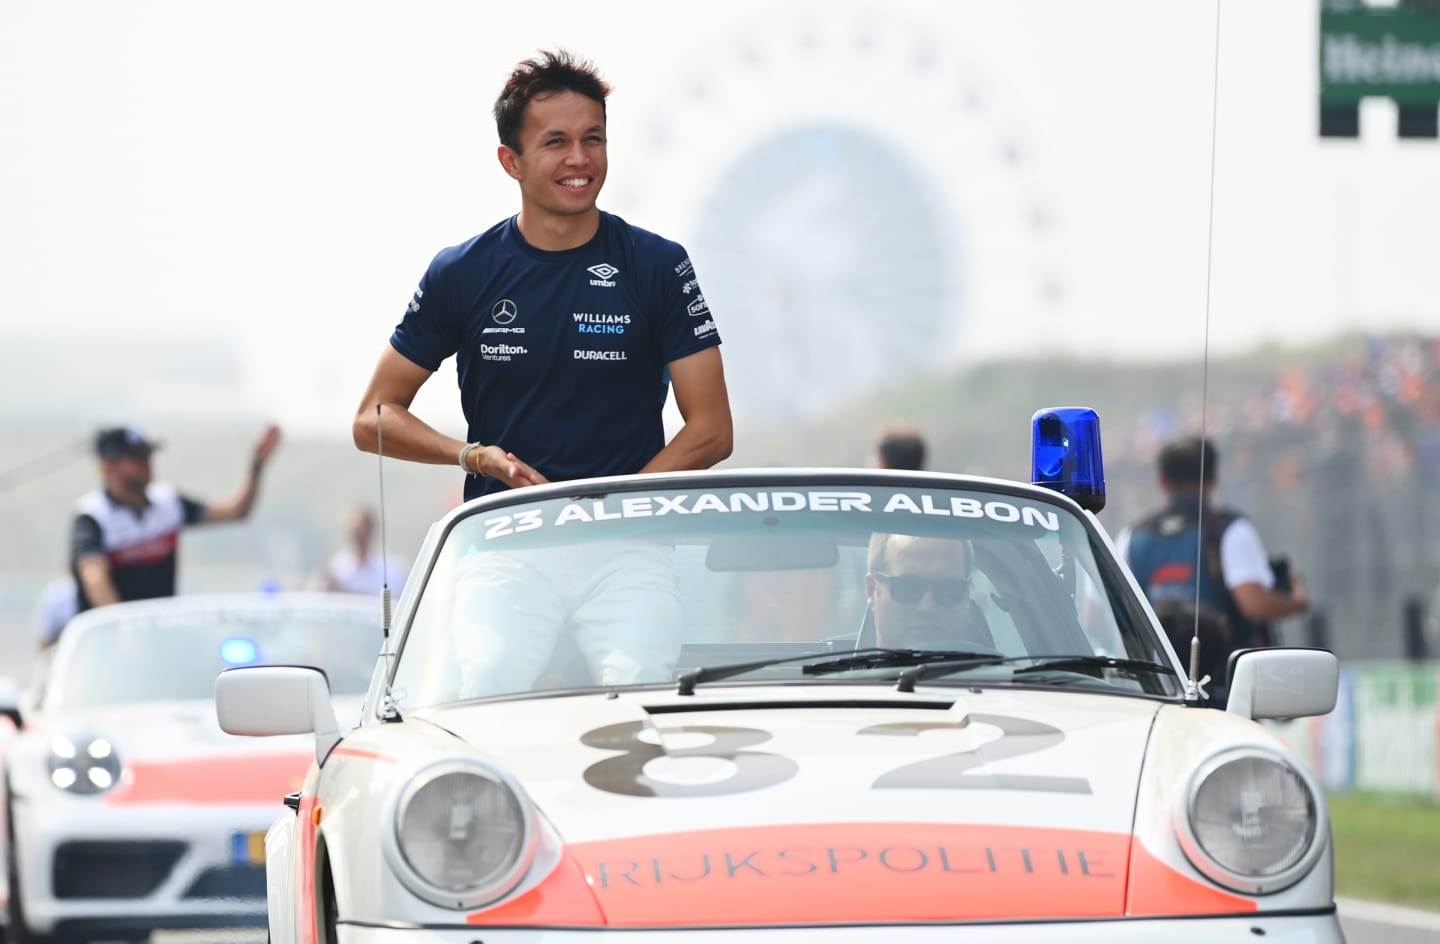 ZANDVOORT, NETHERLANDS - SEPTEMBER 04: Alexander Albon of Thailand and Williams looks on from the drivers parade prior to the F1 Grand Prix of The Netherlands at Circuit Zandvoort on September 04, 2022 in Zandvoort, Netherlands. (Photo by Dan Mullan/Getty Images)